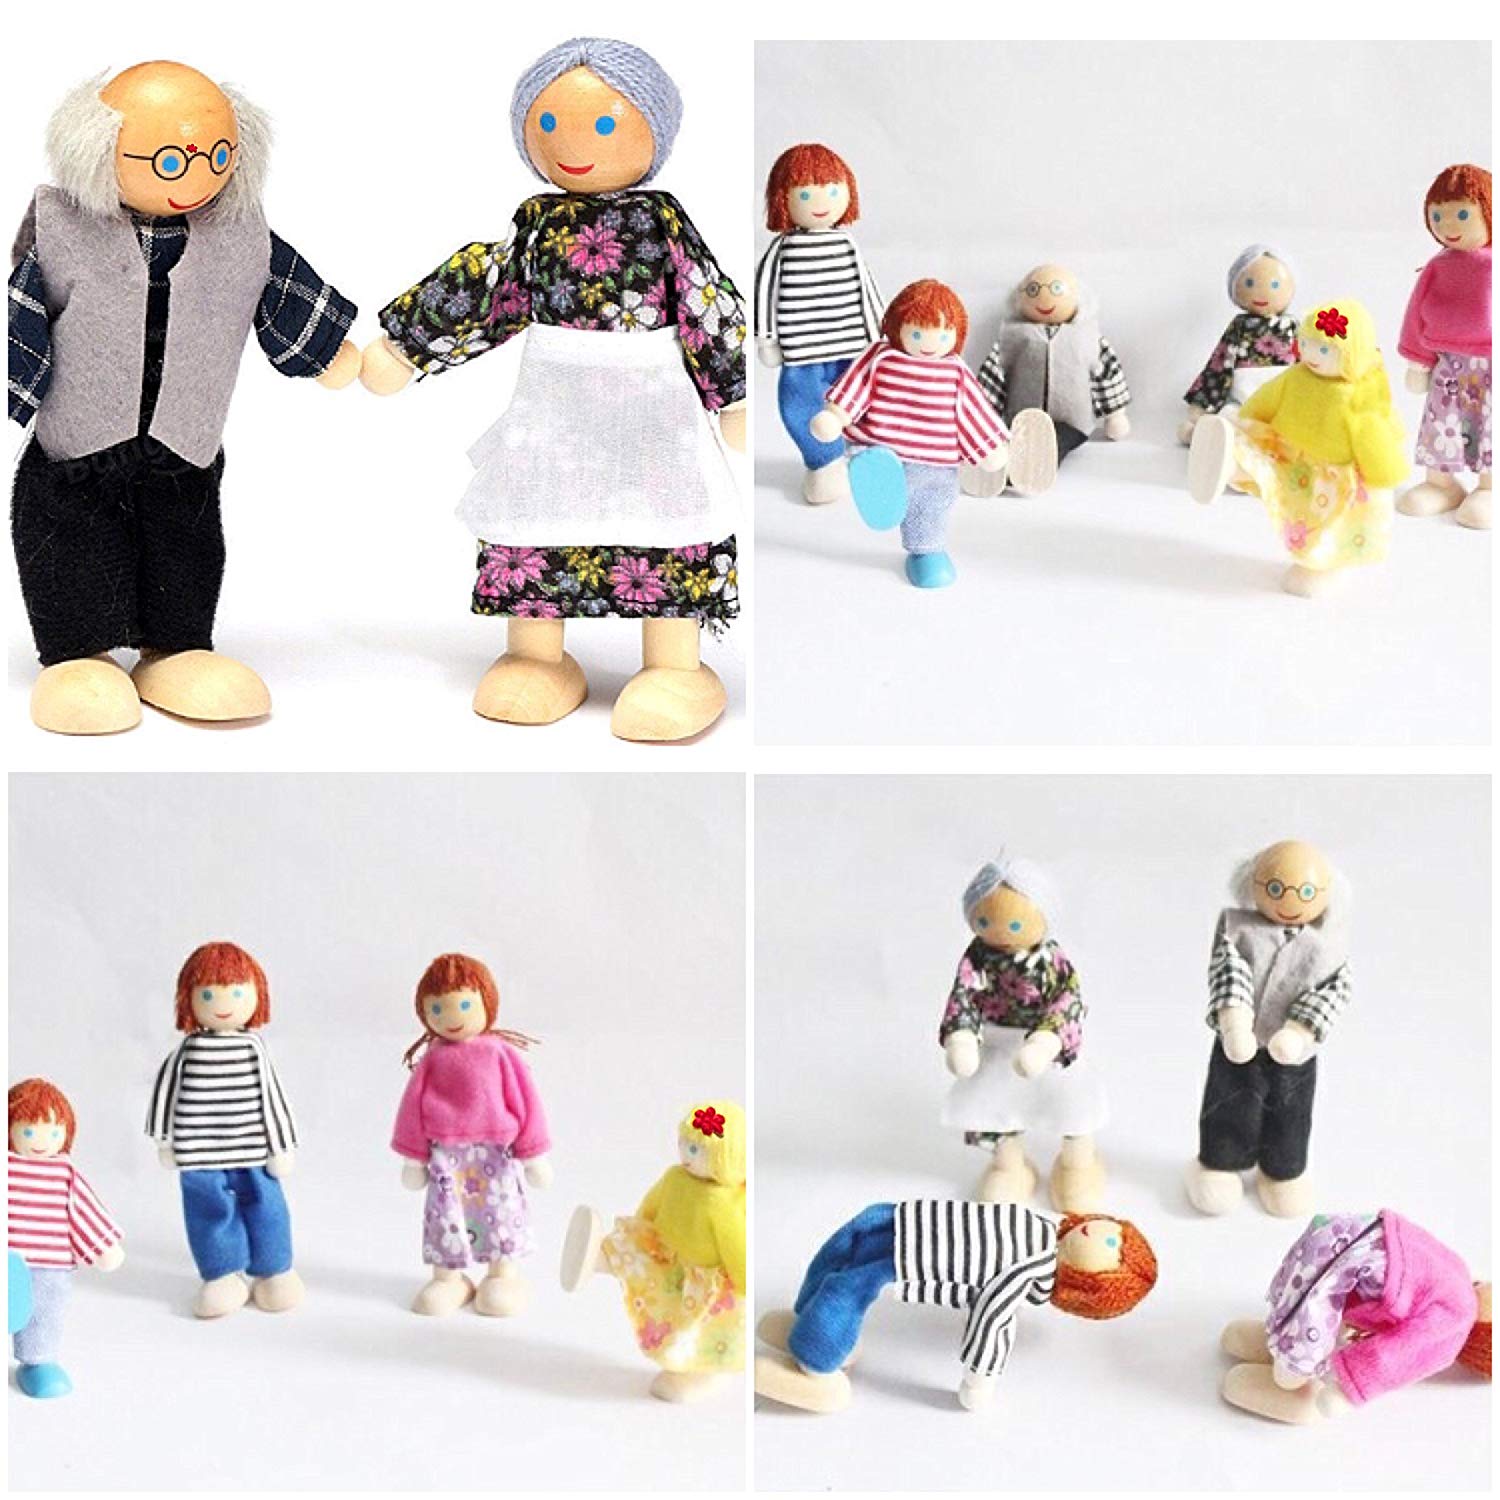 BESTSKY  Kids Girls Lovely Happy Dolls Family Playset Wooden Figures Set of 7 People for Children Dollhouse Pretend Gift - image 2 of 7